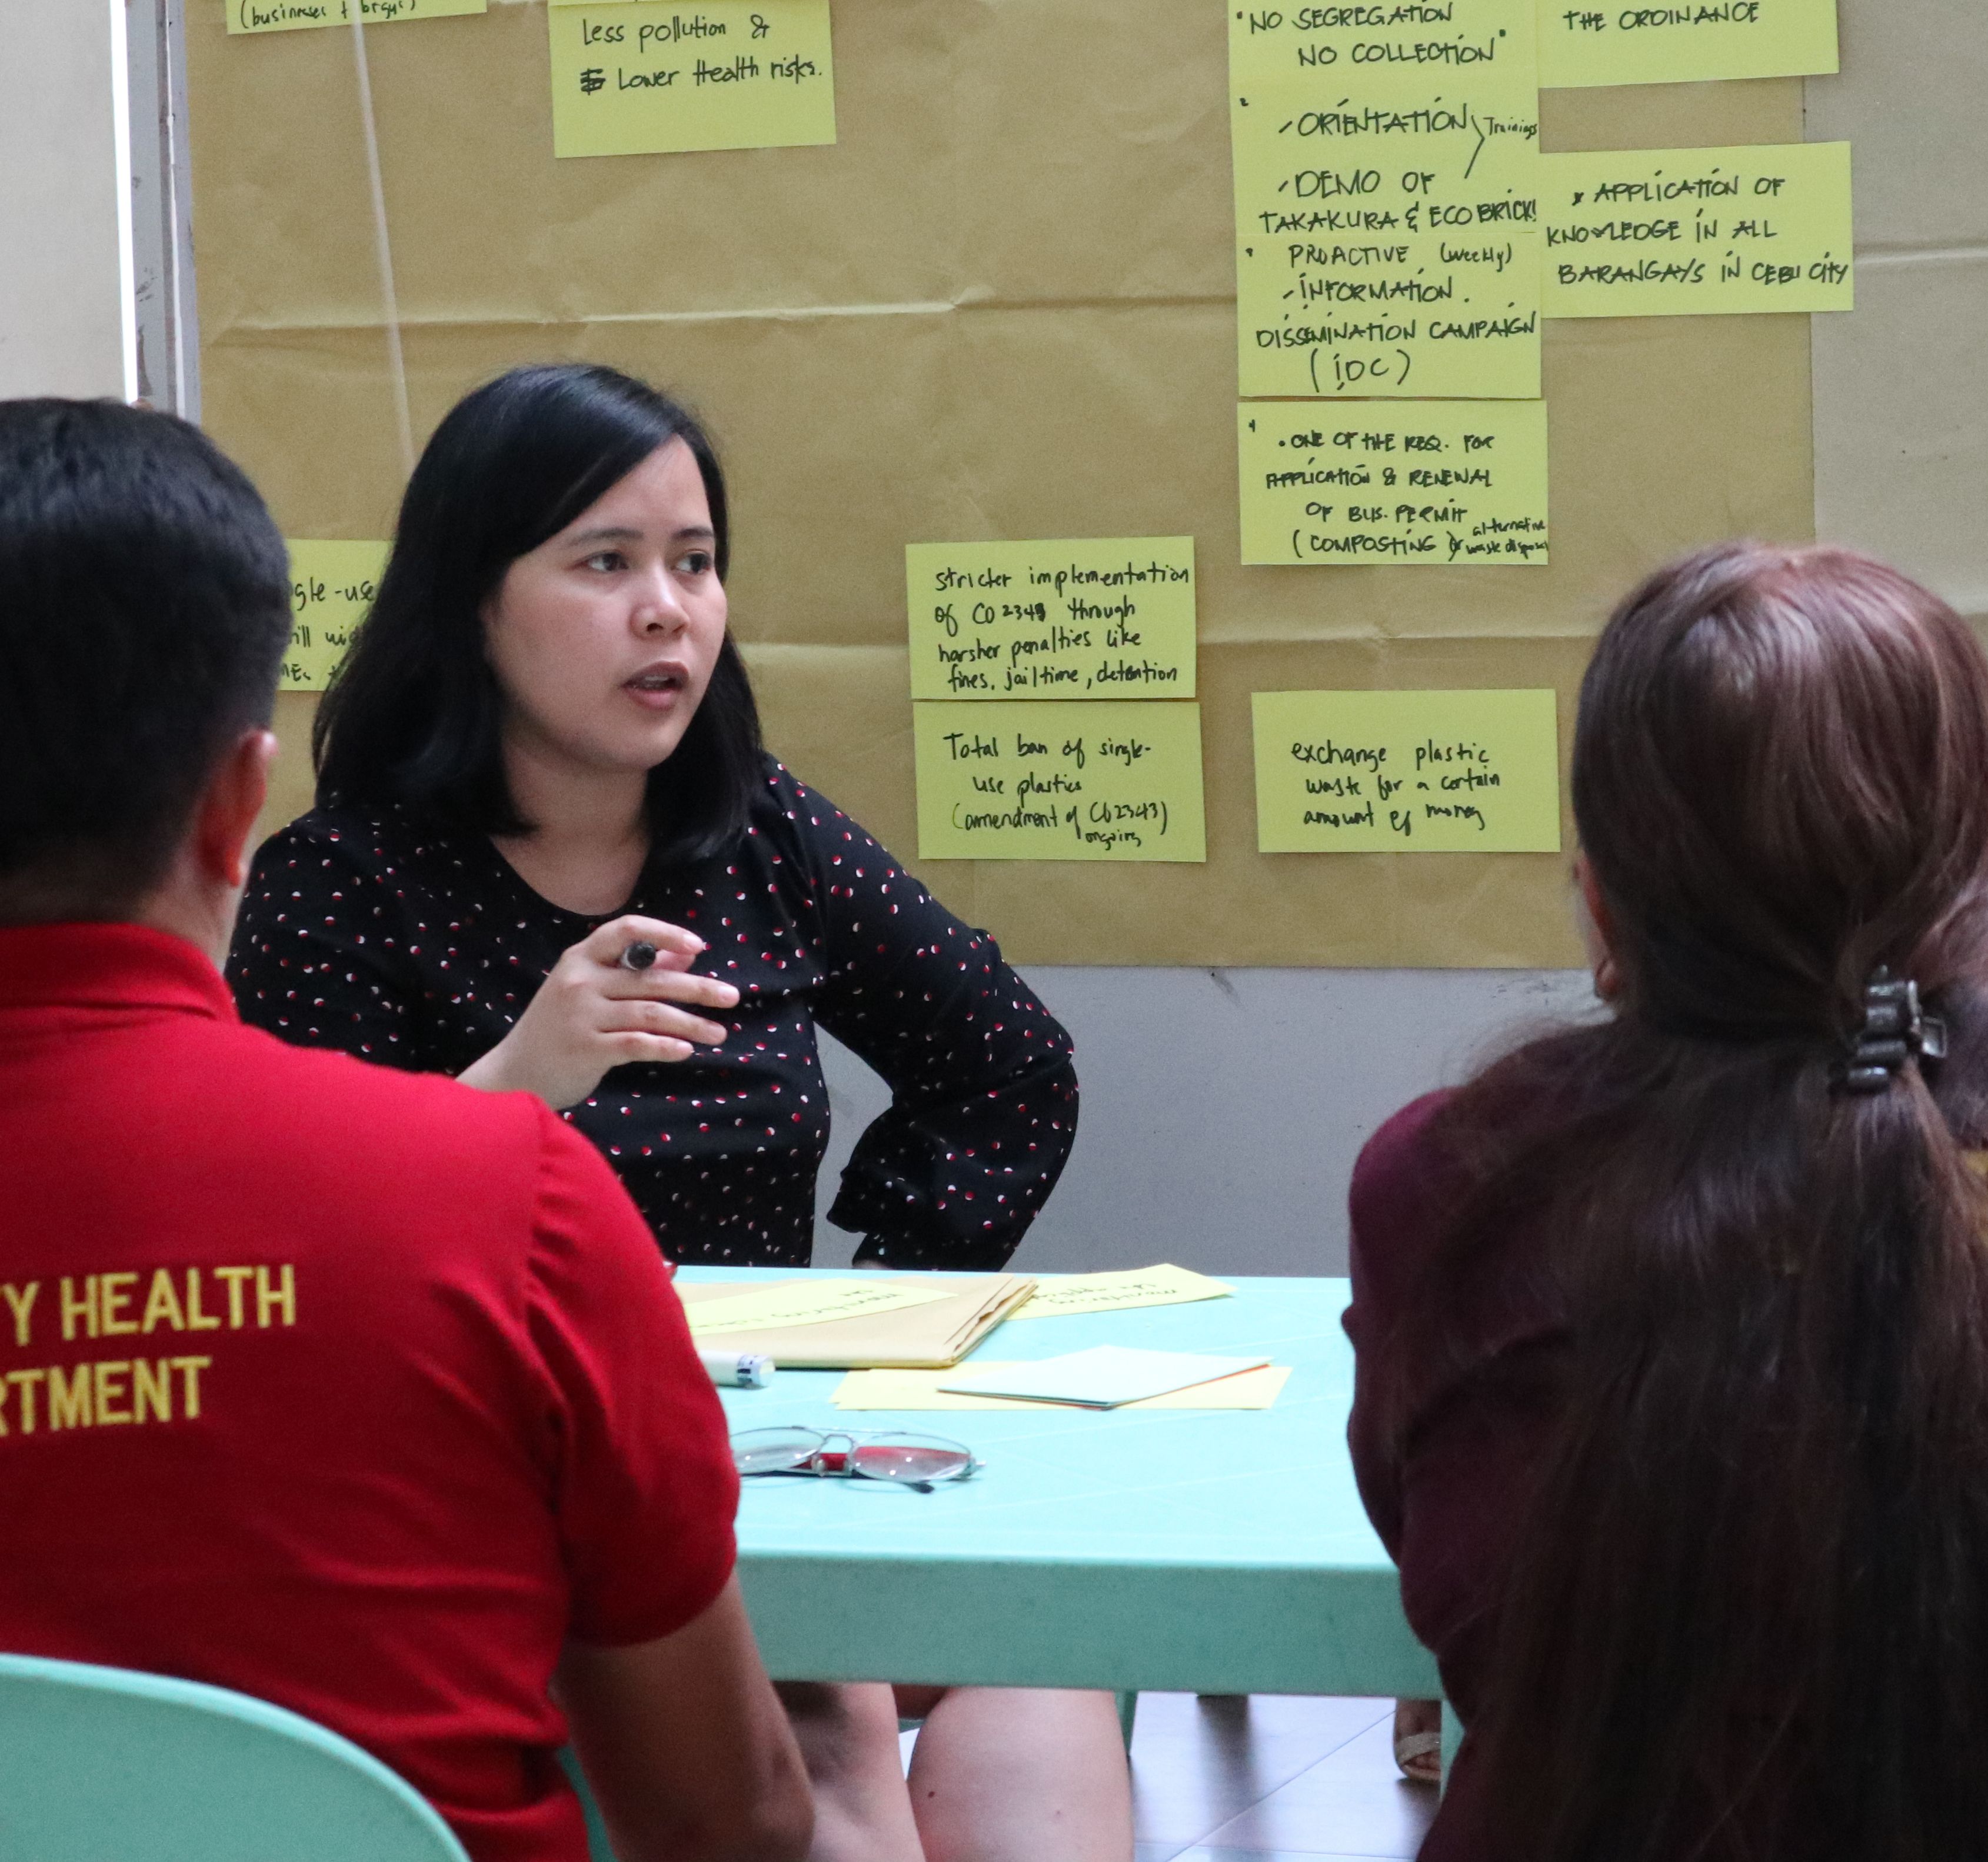 <h1>Policy Planning with Cebu City LGU</h1>
<p>Last March 4, 2019, World Wide Fund for Nature (WWF) Philippines’</p>
<p style="text-align: right;"><a href="https://support.wwf.org.ph/what-we-do/food/thesustainablediner/policy-planning-cebu/" target="_blank">Read More &gt;</a></p>